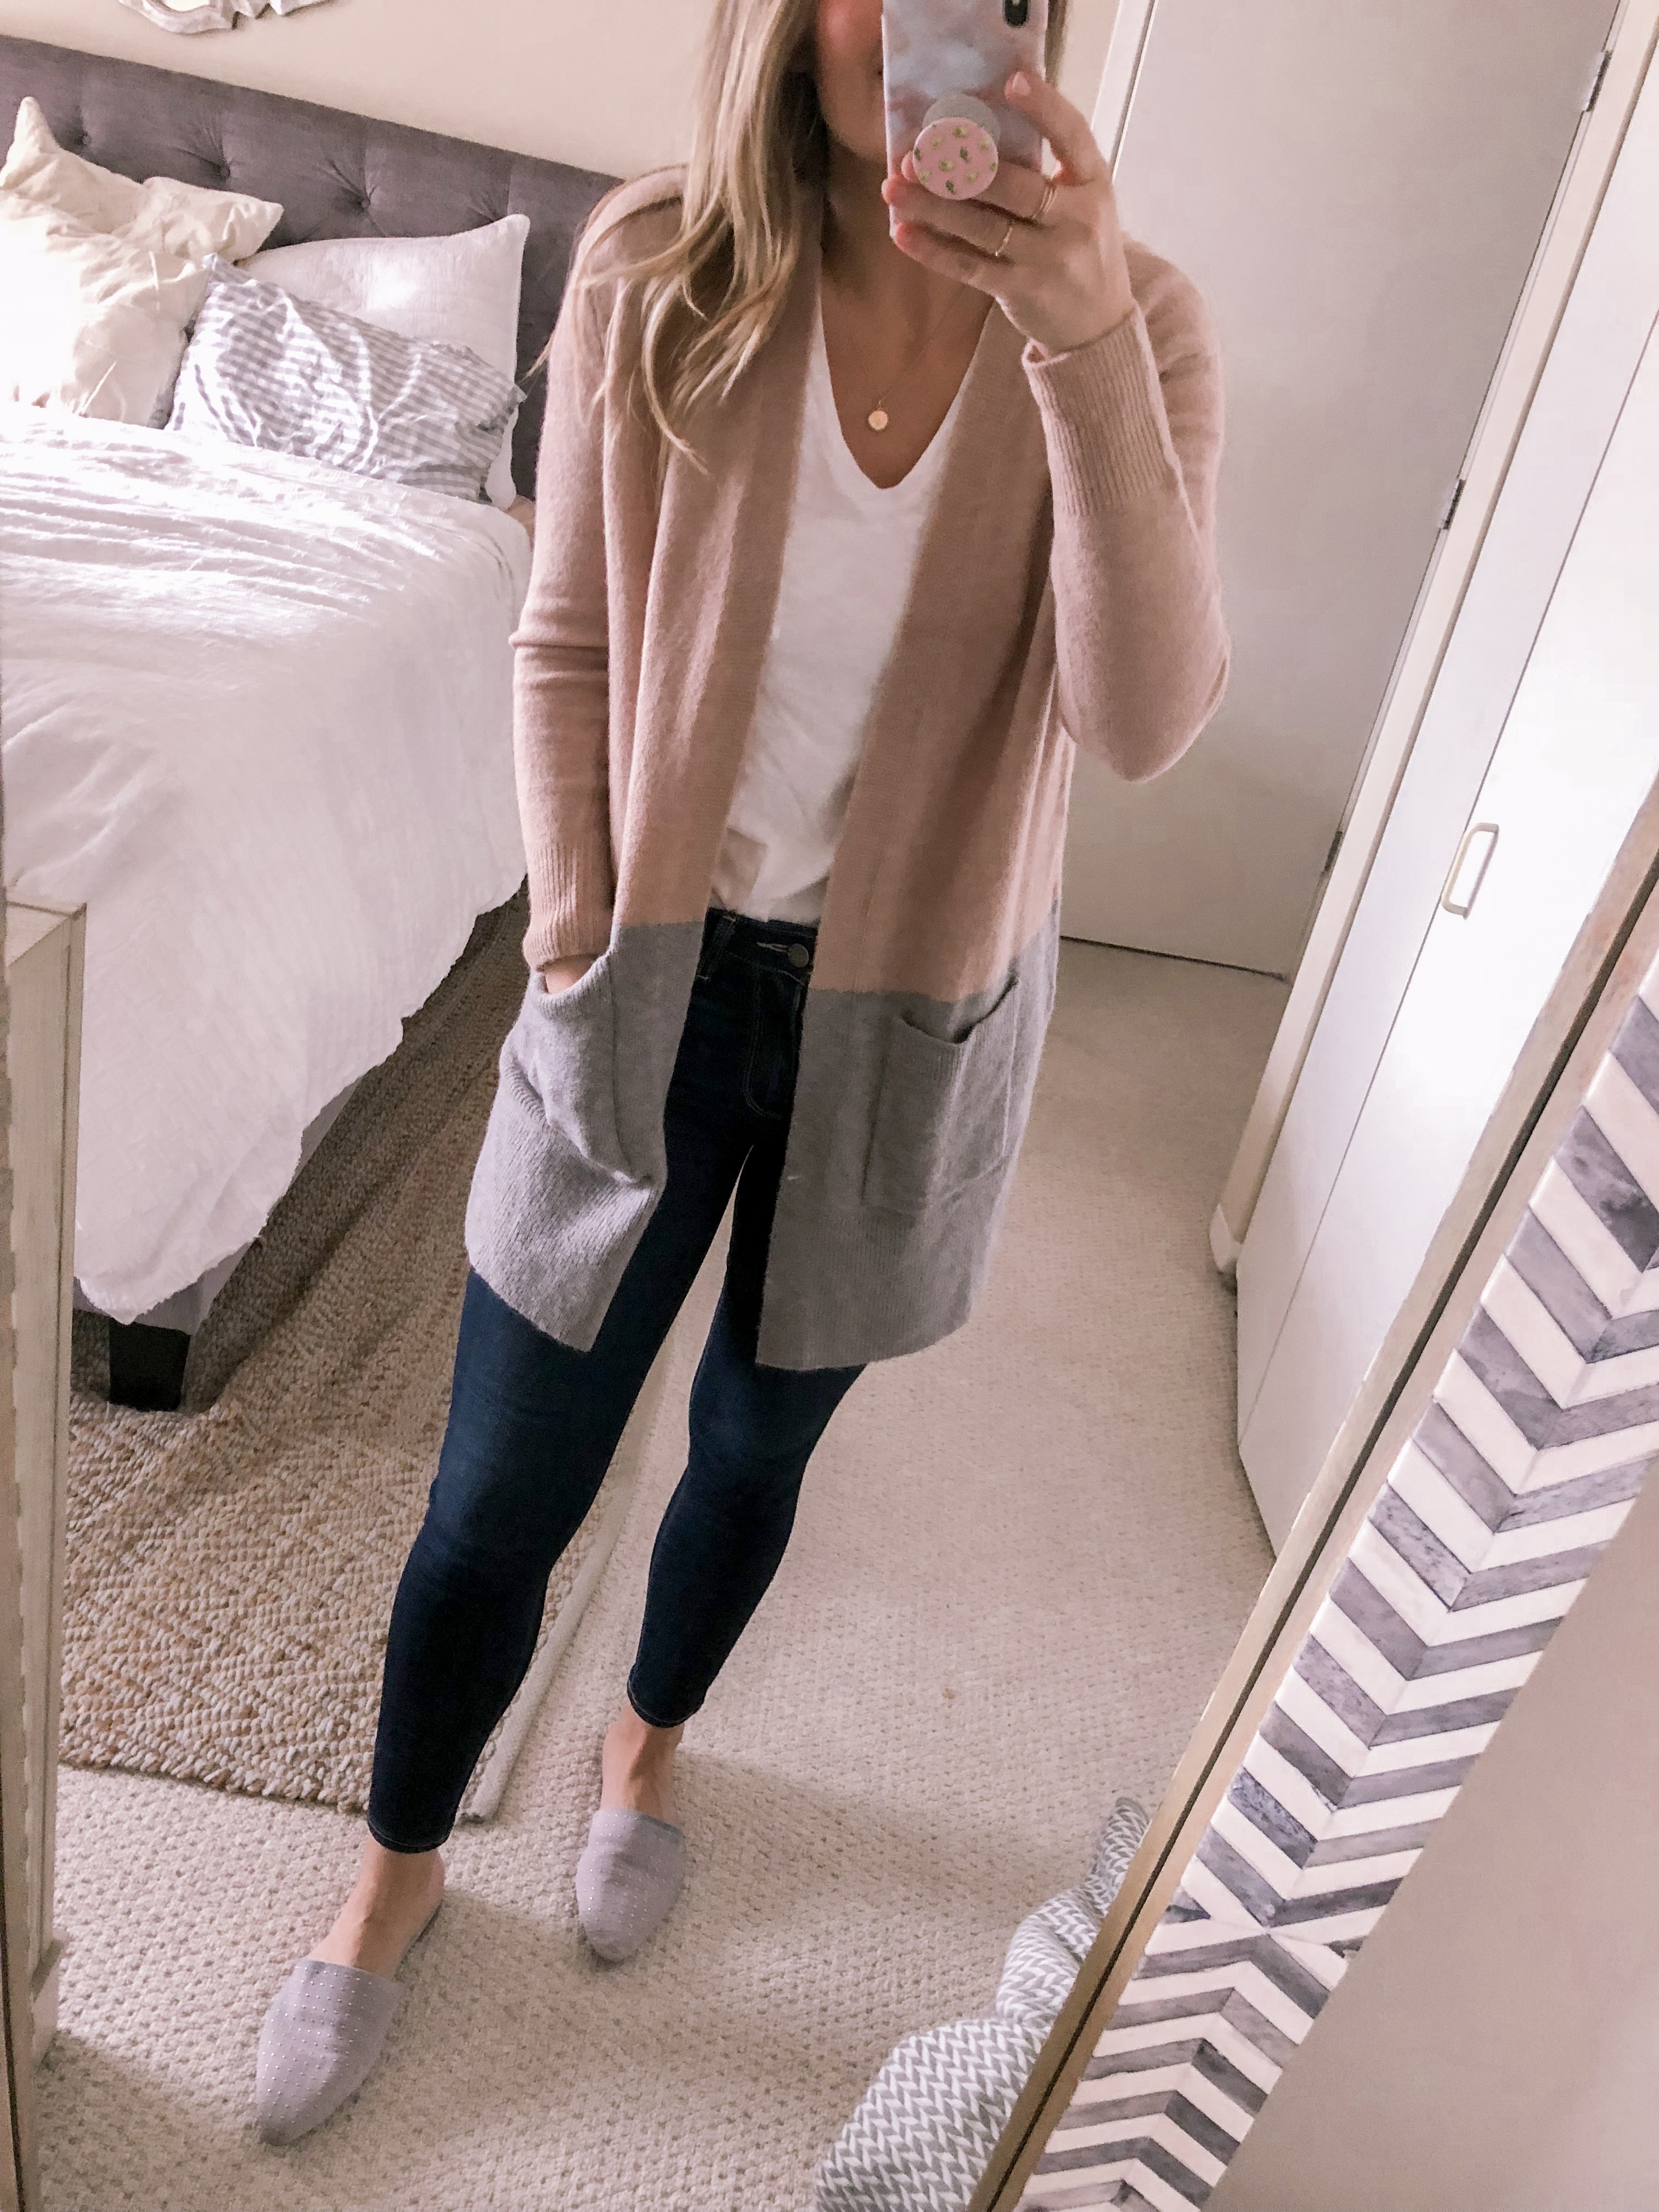 Popular Chicago fashion blogger Visions of Vogue styles the Madewell colorblock cardigan with the Whisper Tee for a casual office outfit idea.